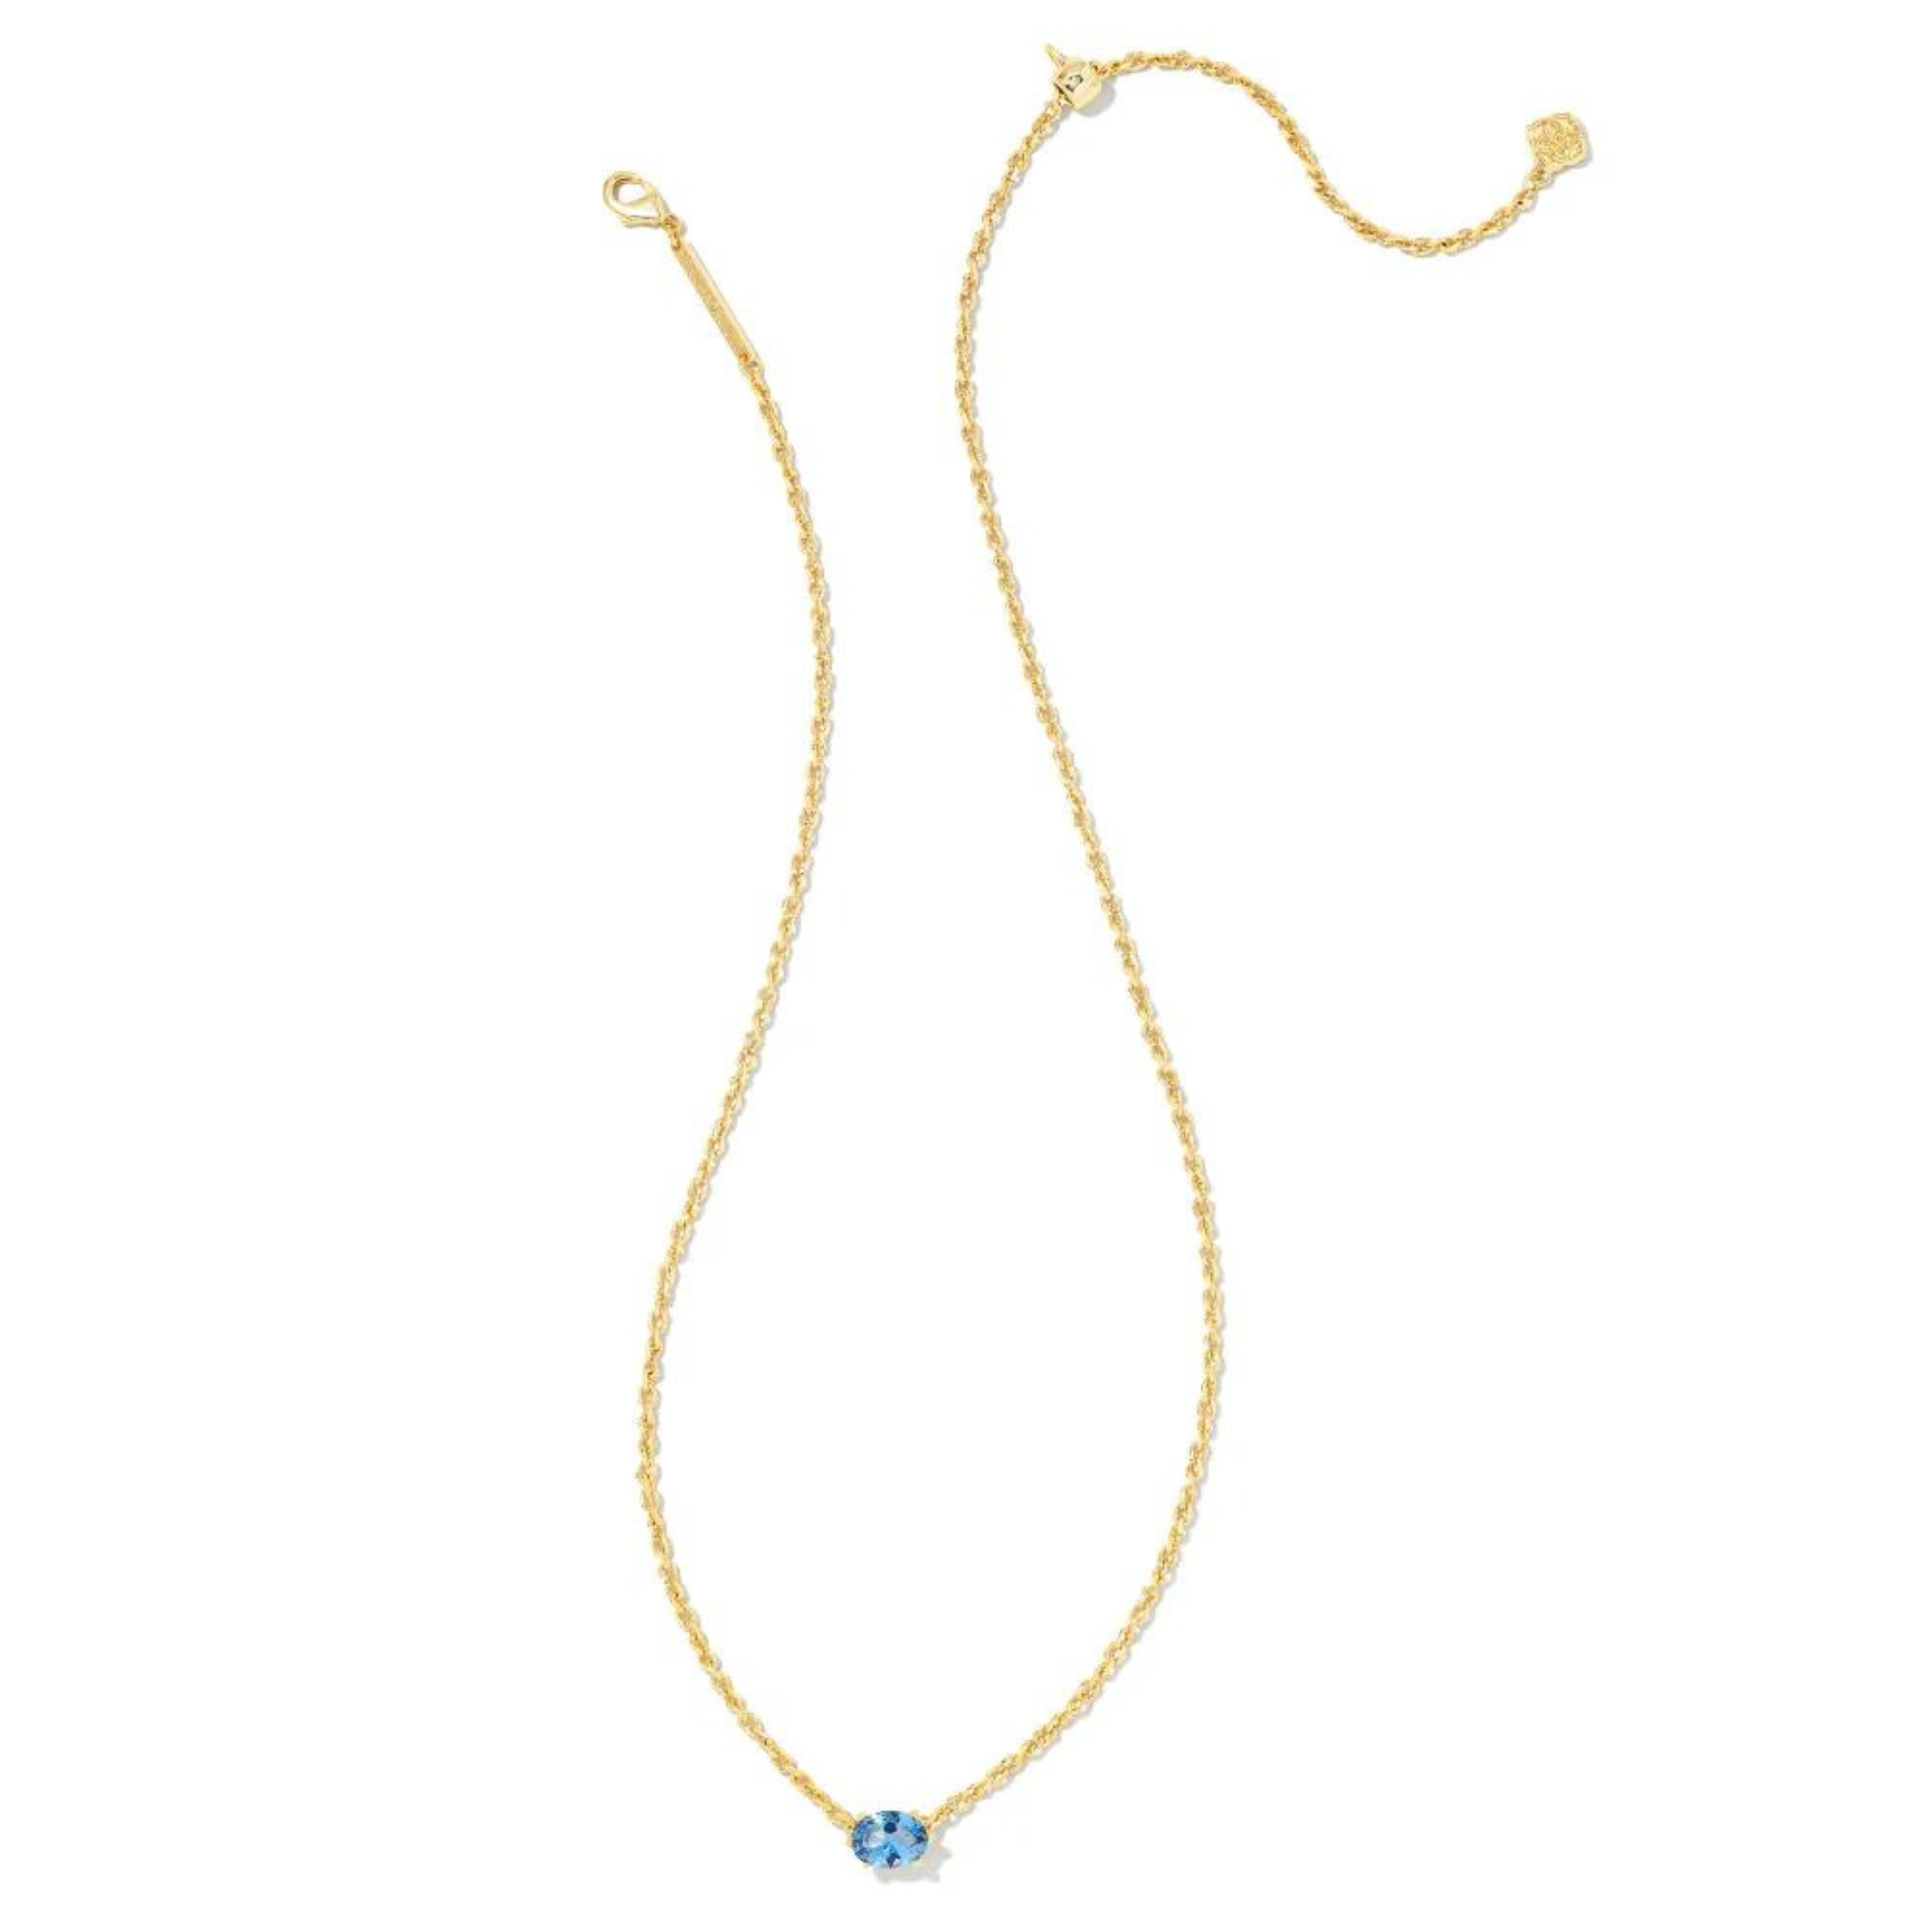 Kendra Scott | Cailin Gold Pendant Necklace in Blue Violet Crystal - Giddy Up Glamour Boutique